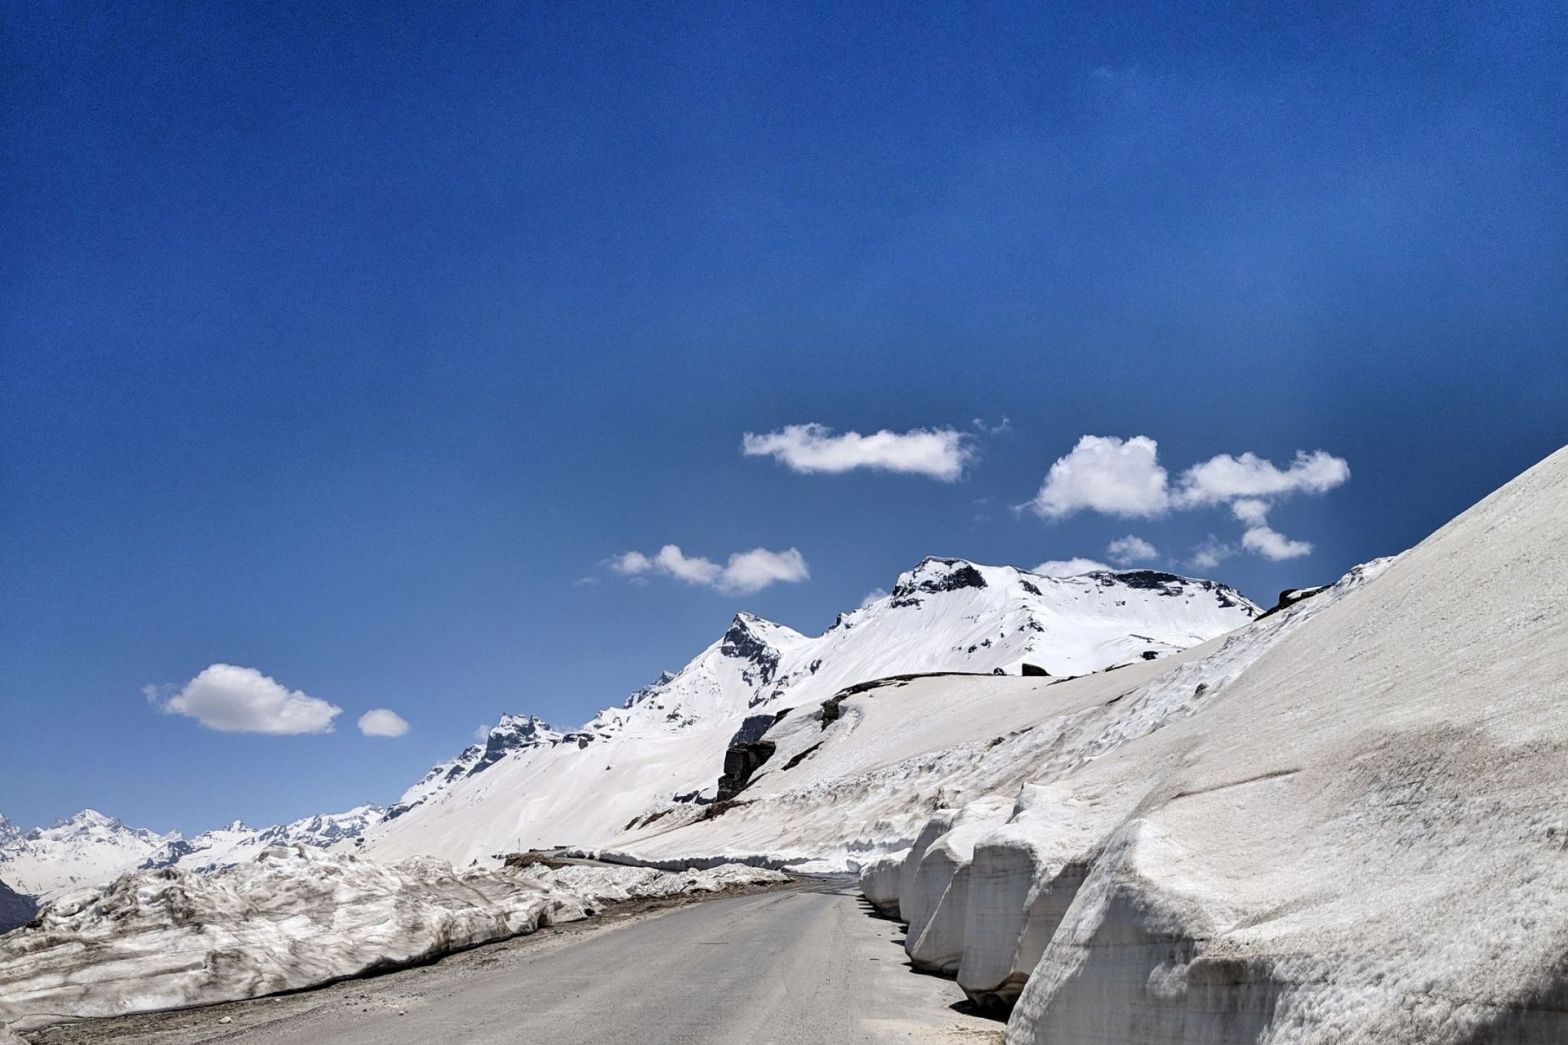 One Day Manali to Rohtang Pass Trip by Cab